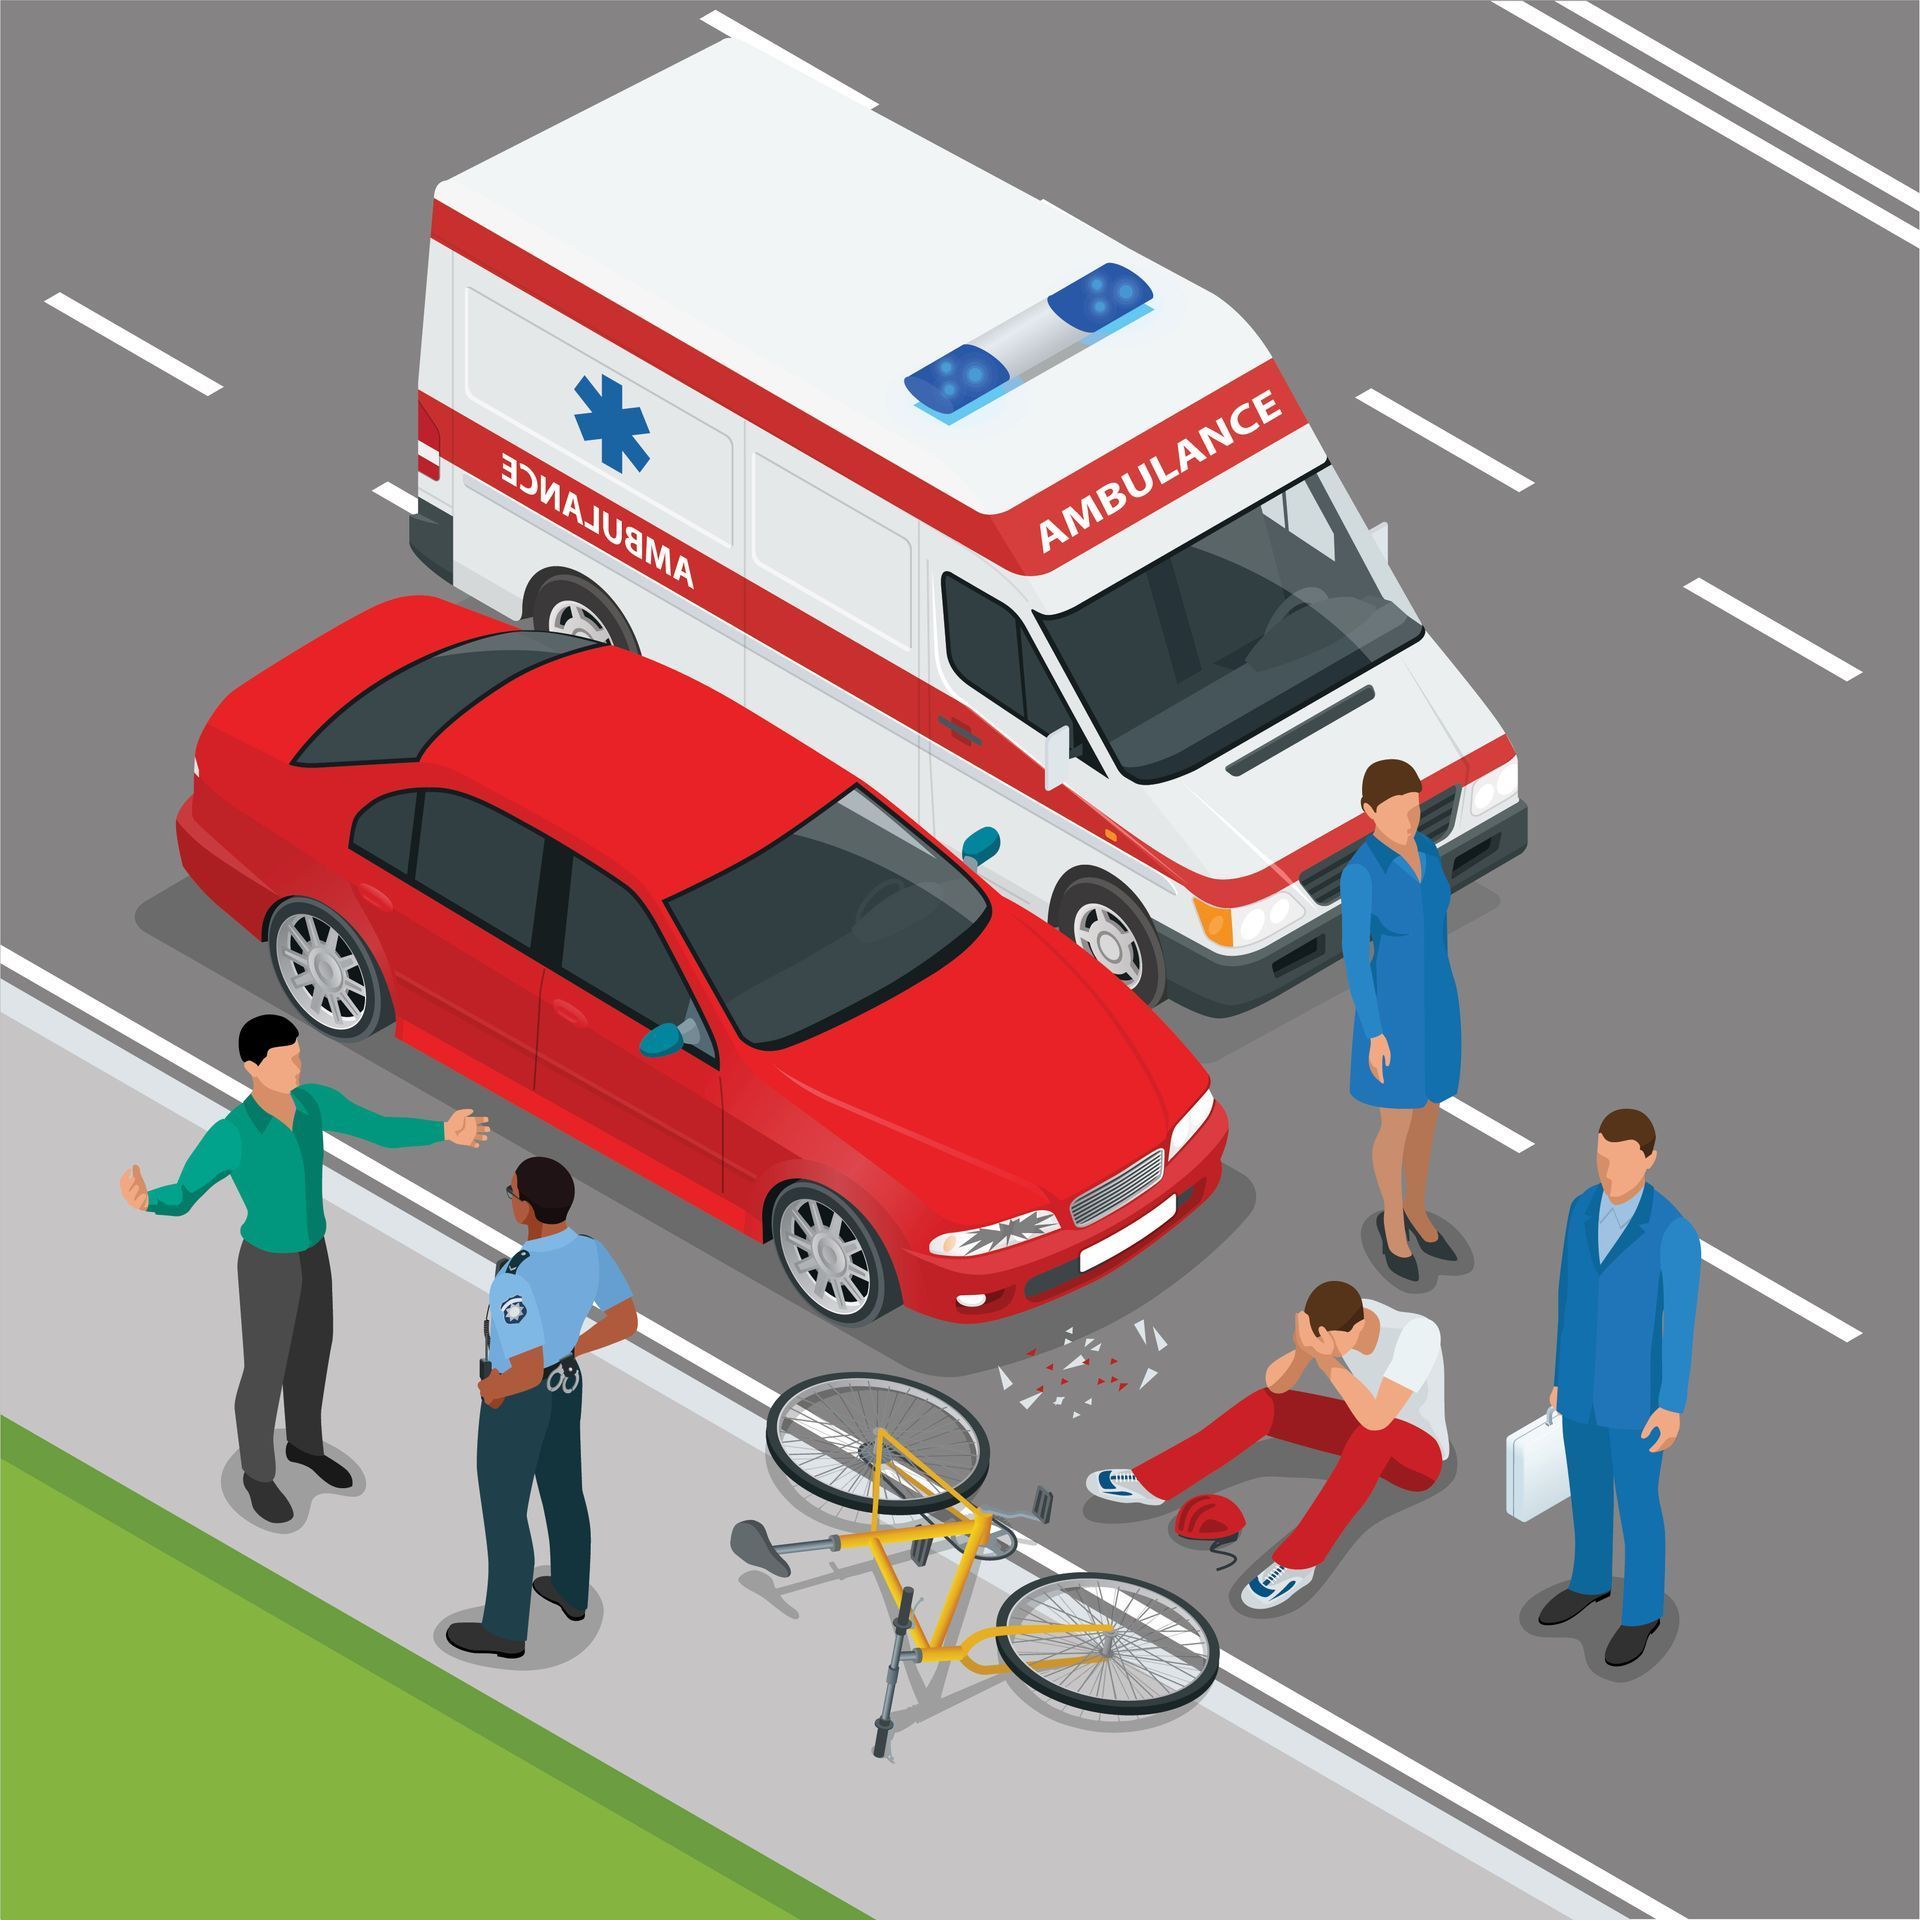 bicycle crash scene with emergency and police